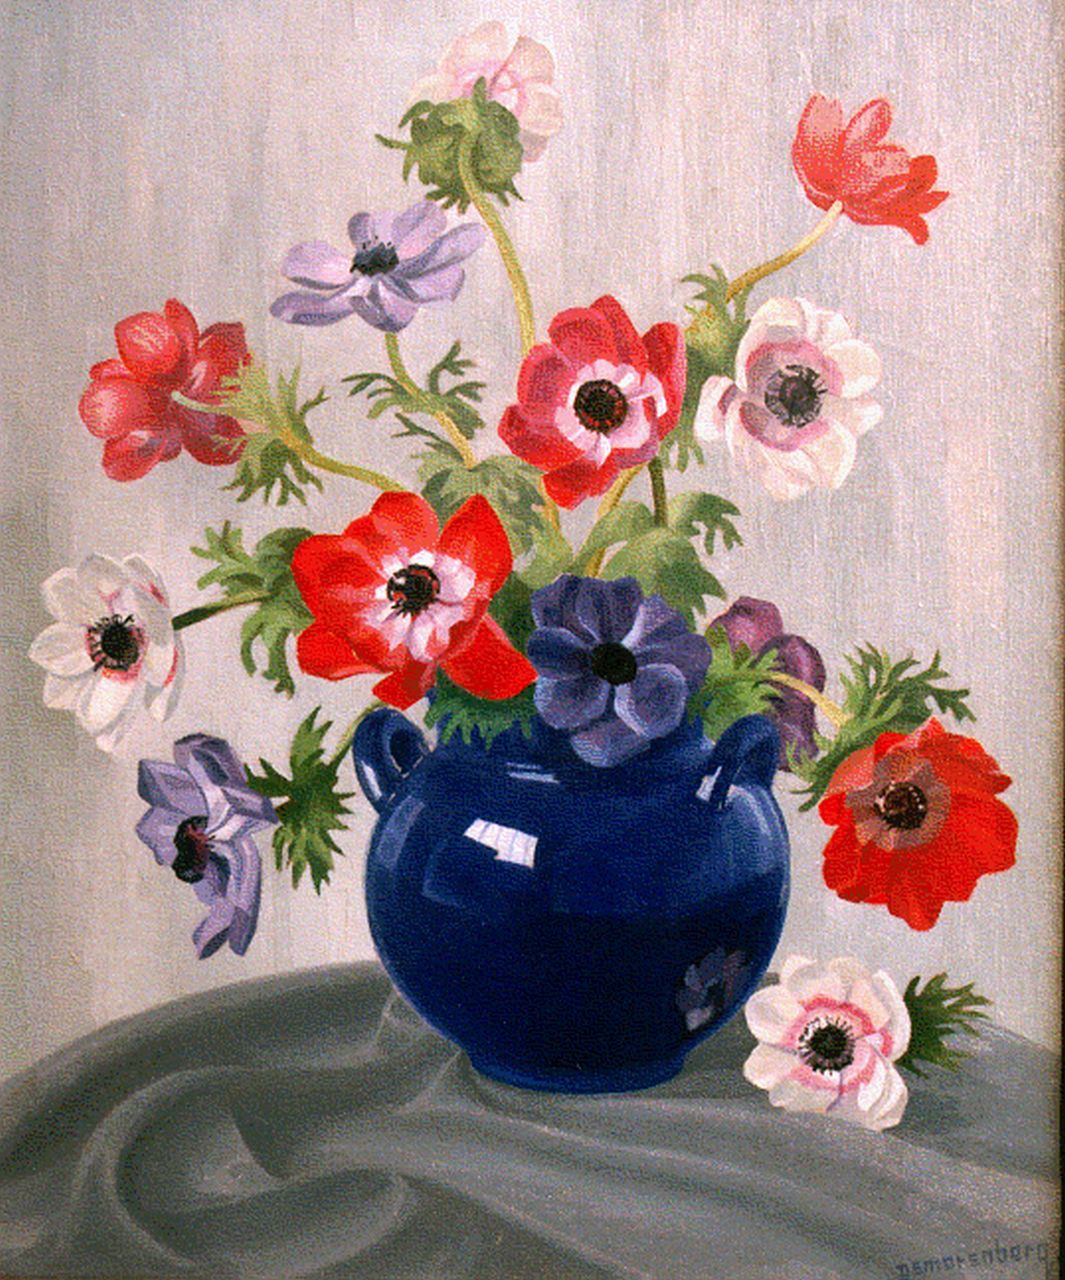 Smorenberg D.  | Dirk Smorenberg, Anemones in a blue vase, oil on canvas 60.0 x 50.0 cm, signed l.r. and dated 1922